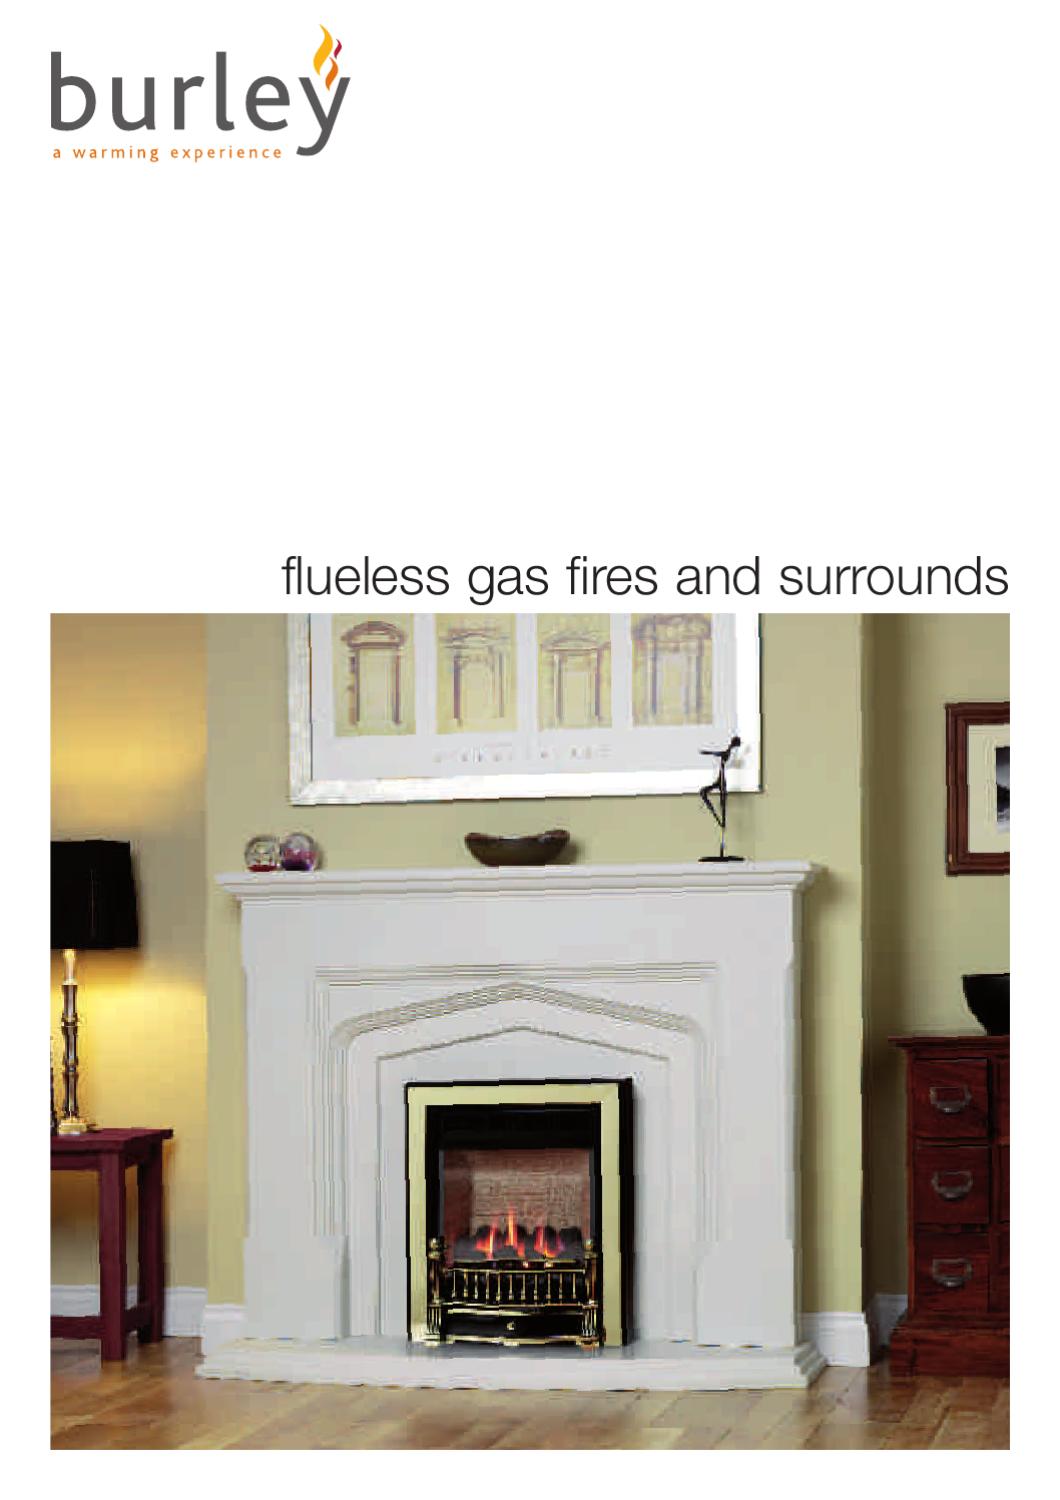 Non Combustible Fireplace Mantel Elegant Burley Gas Fires Brochure by Fires Fireplaces Stoves issuu